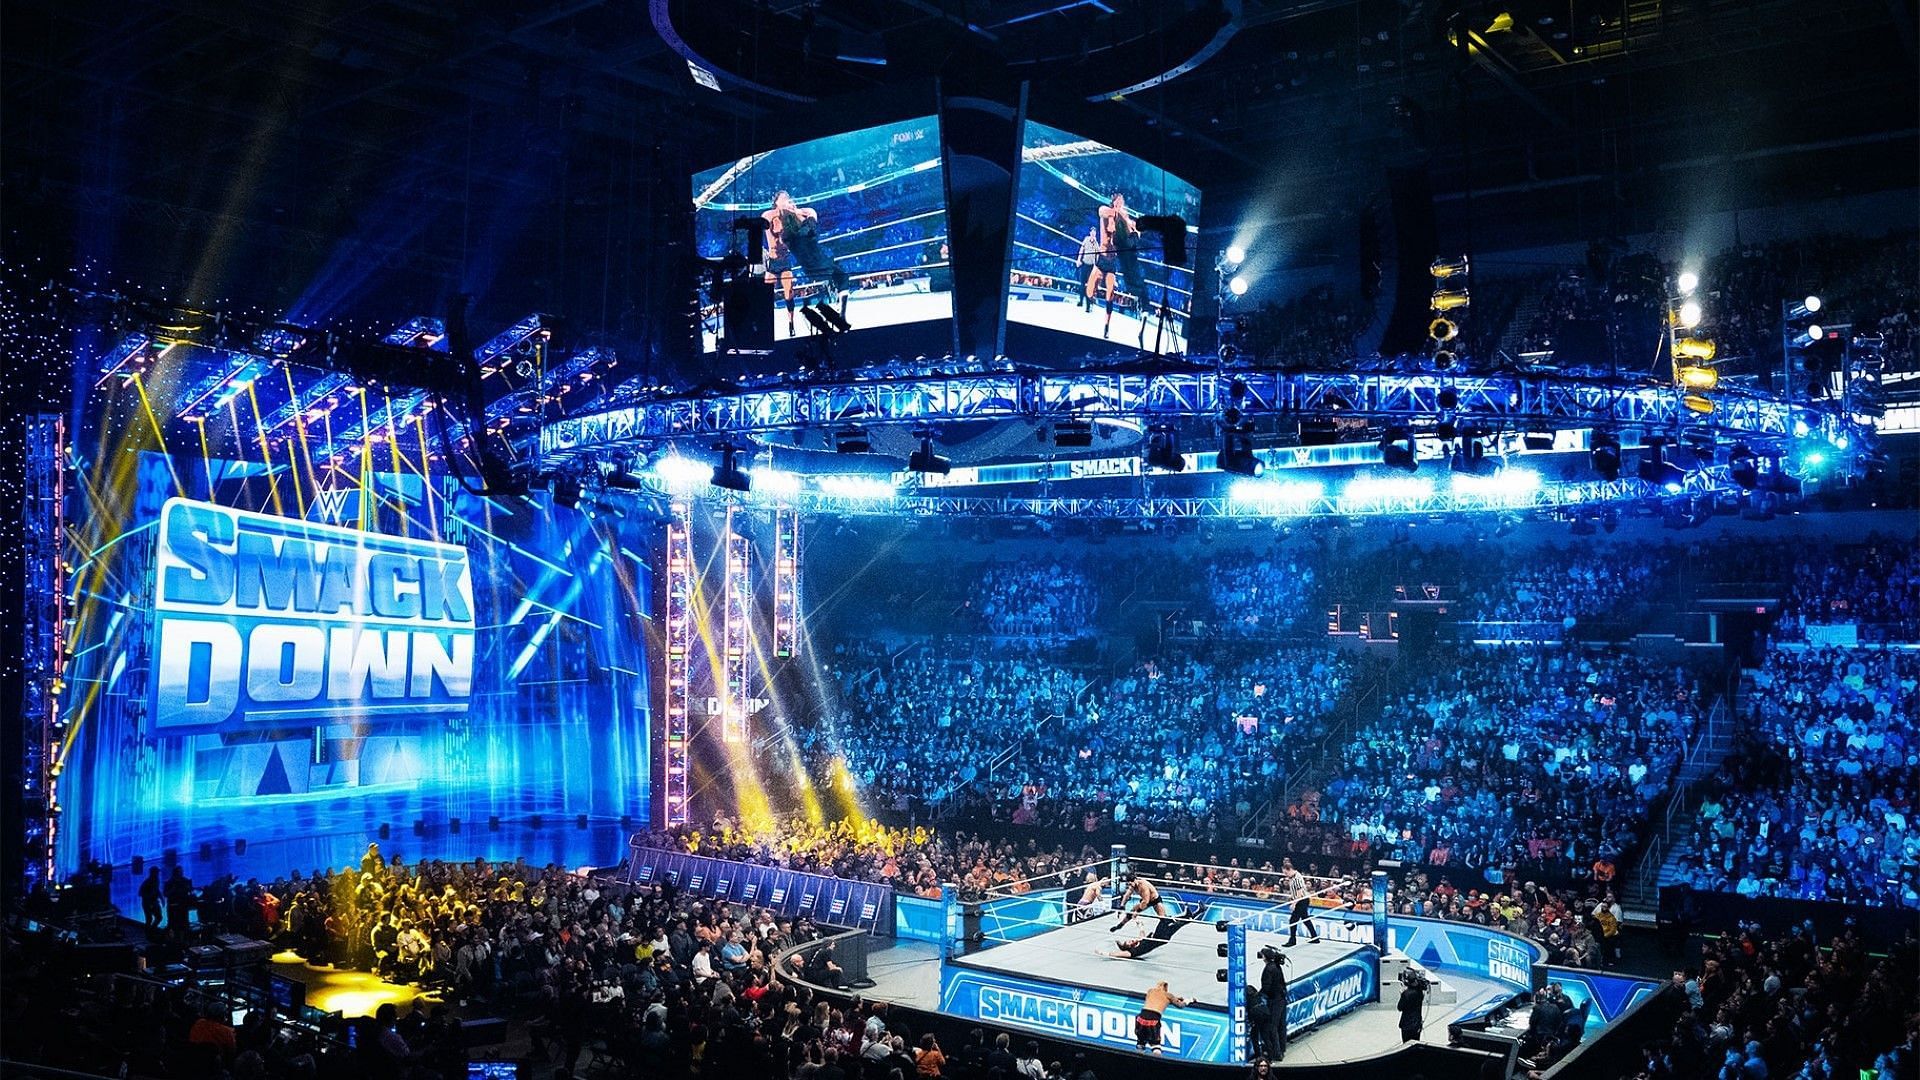 The WWE SmackDown logo and ring/stage on display inside arena